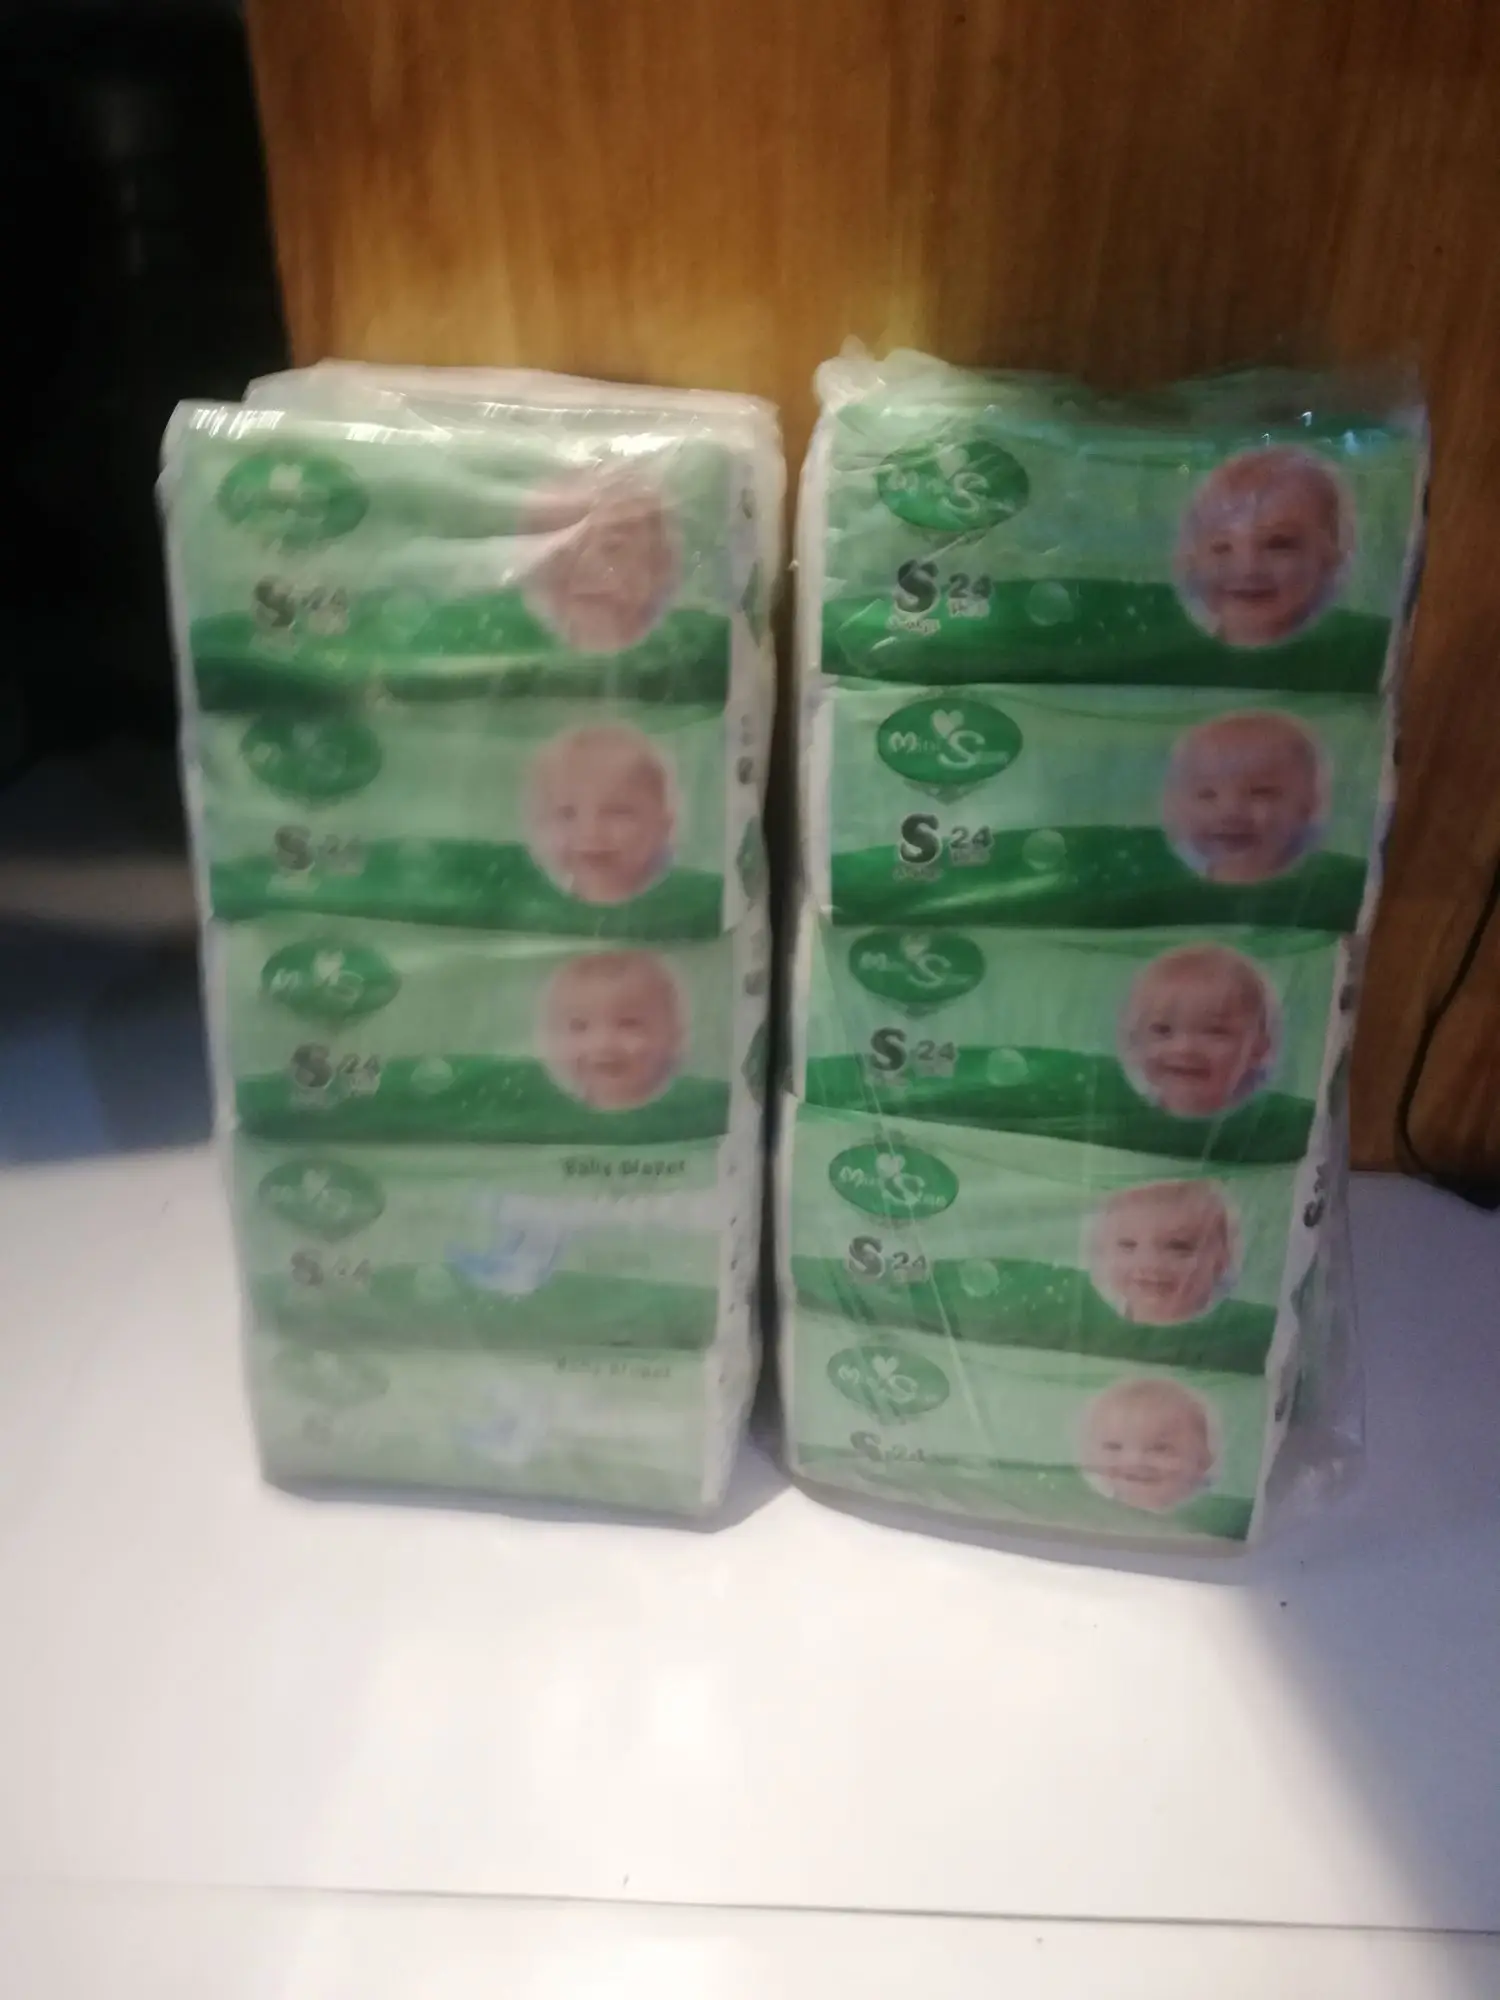 cheapest taped diaper for baby 24pcs. SMALL